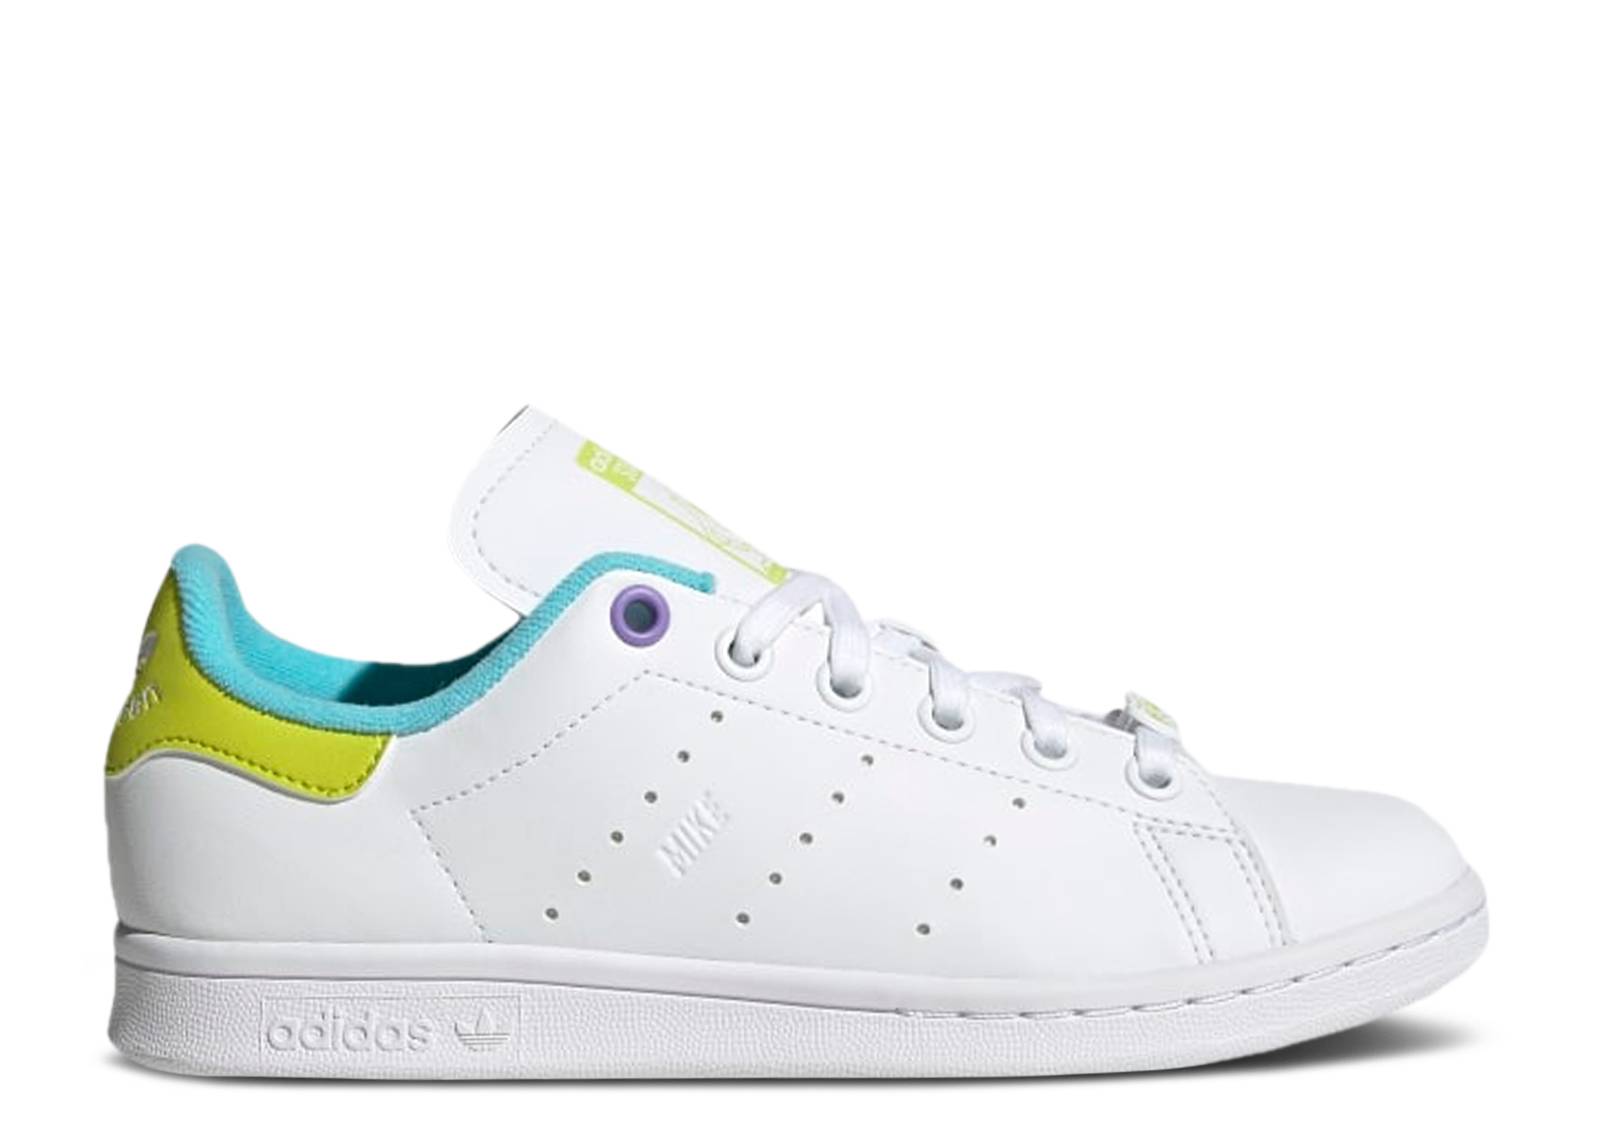 Monsters Inc. x Stan Smith J 'Mike & Sulley'